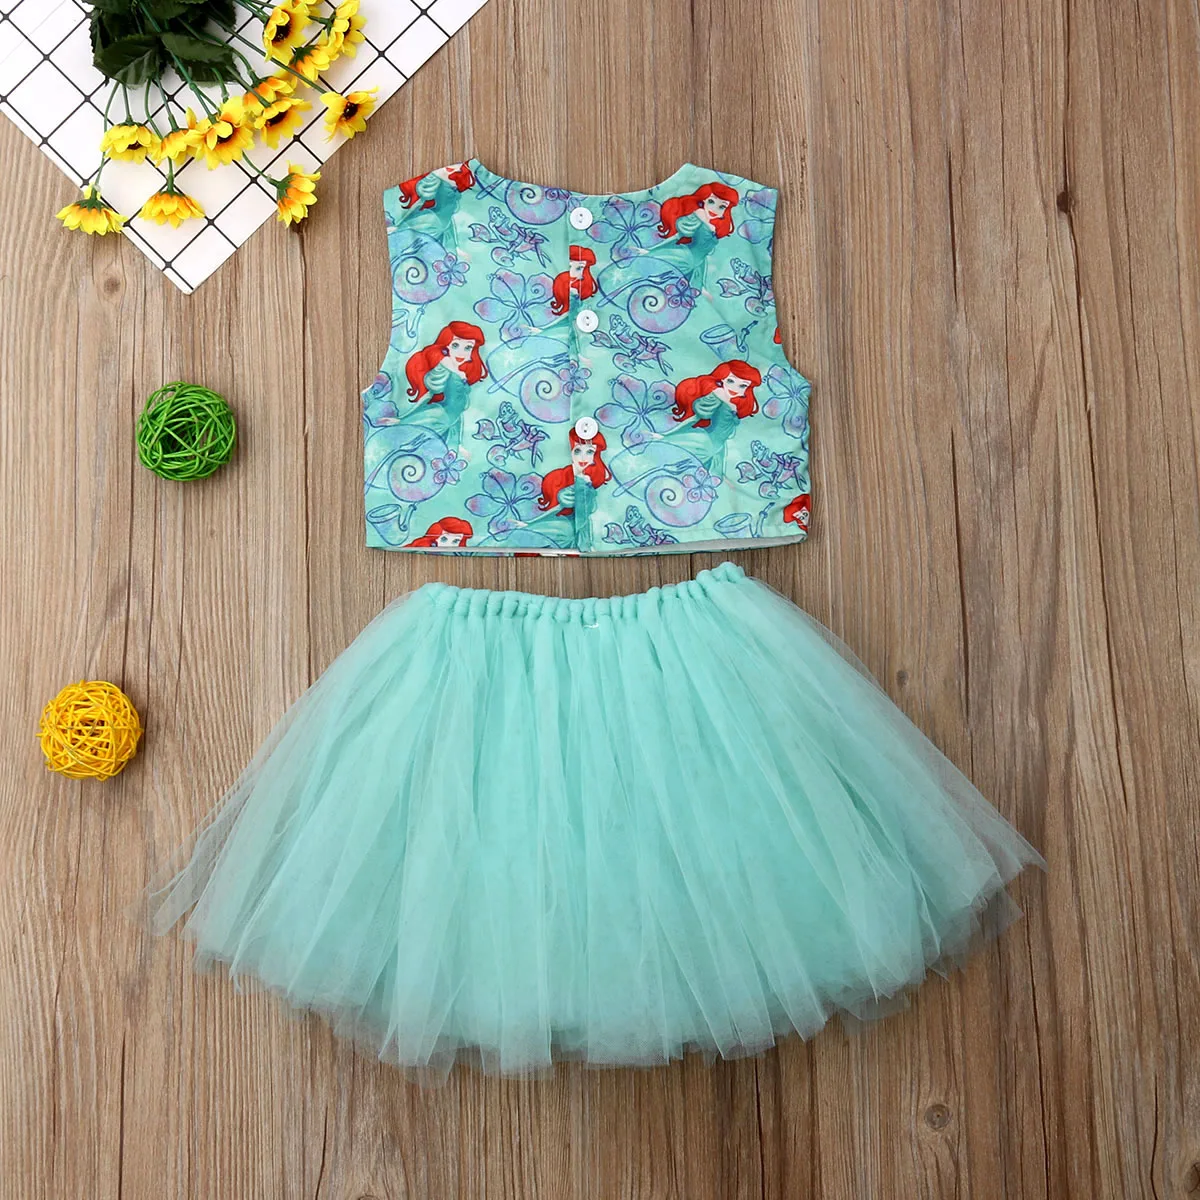 Toddler Infant Kids Baby Girl Mermaid Vest Tops Mesh Ball Gown Dress Outfits Summer Sunsuit | Детская одежда и обувь - Фото №1